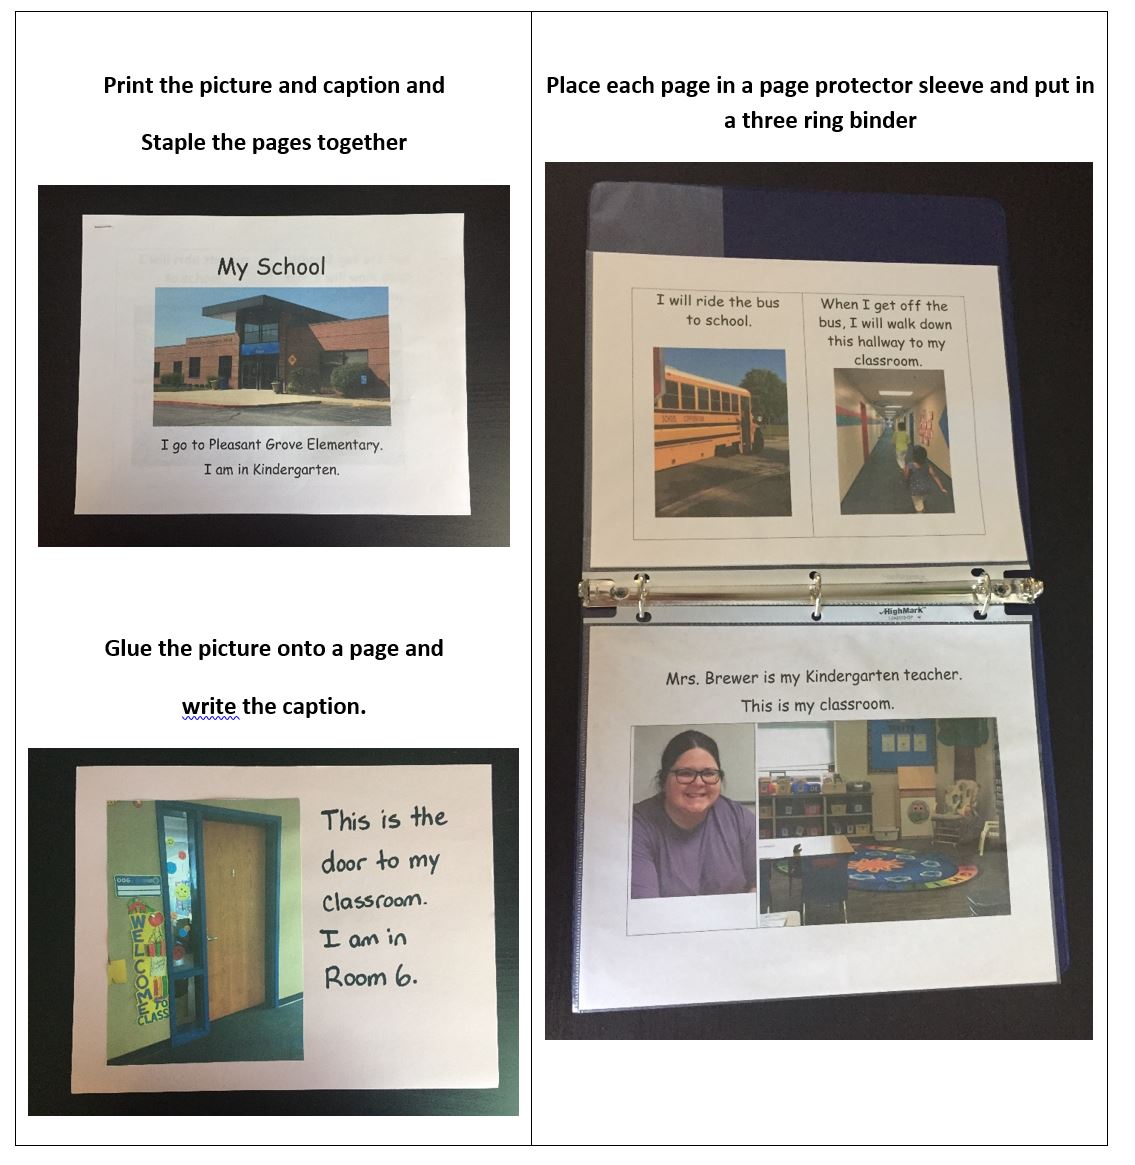 images of a flip book and directions on how to make.  First, Print the picture and caption and staple the pages together or glue picture onto a page and write the caption.  Next, Place each page in a page protector sleeve and put in a three ring binder